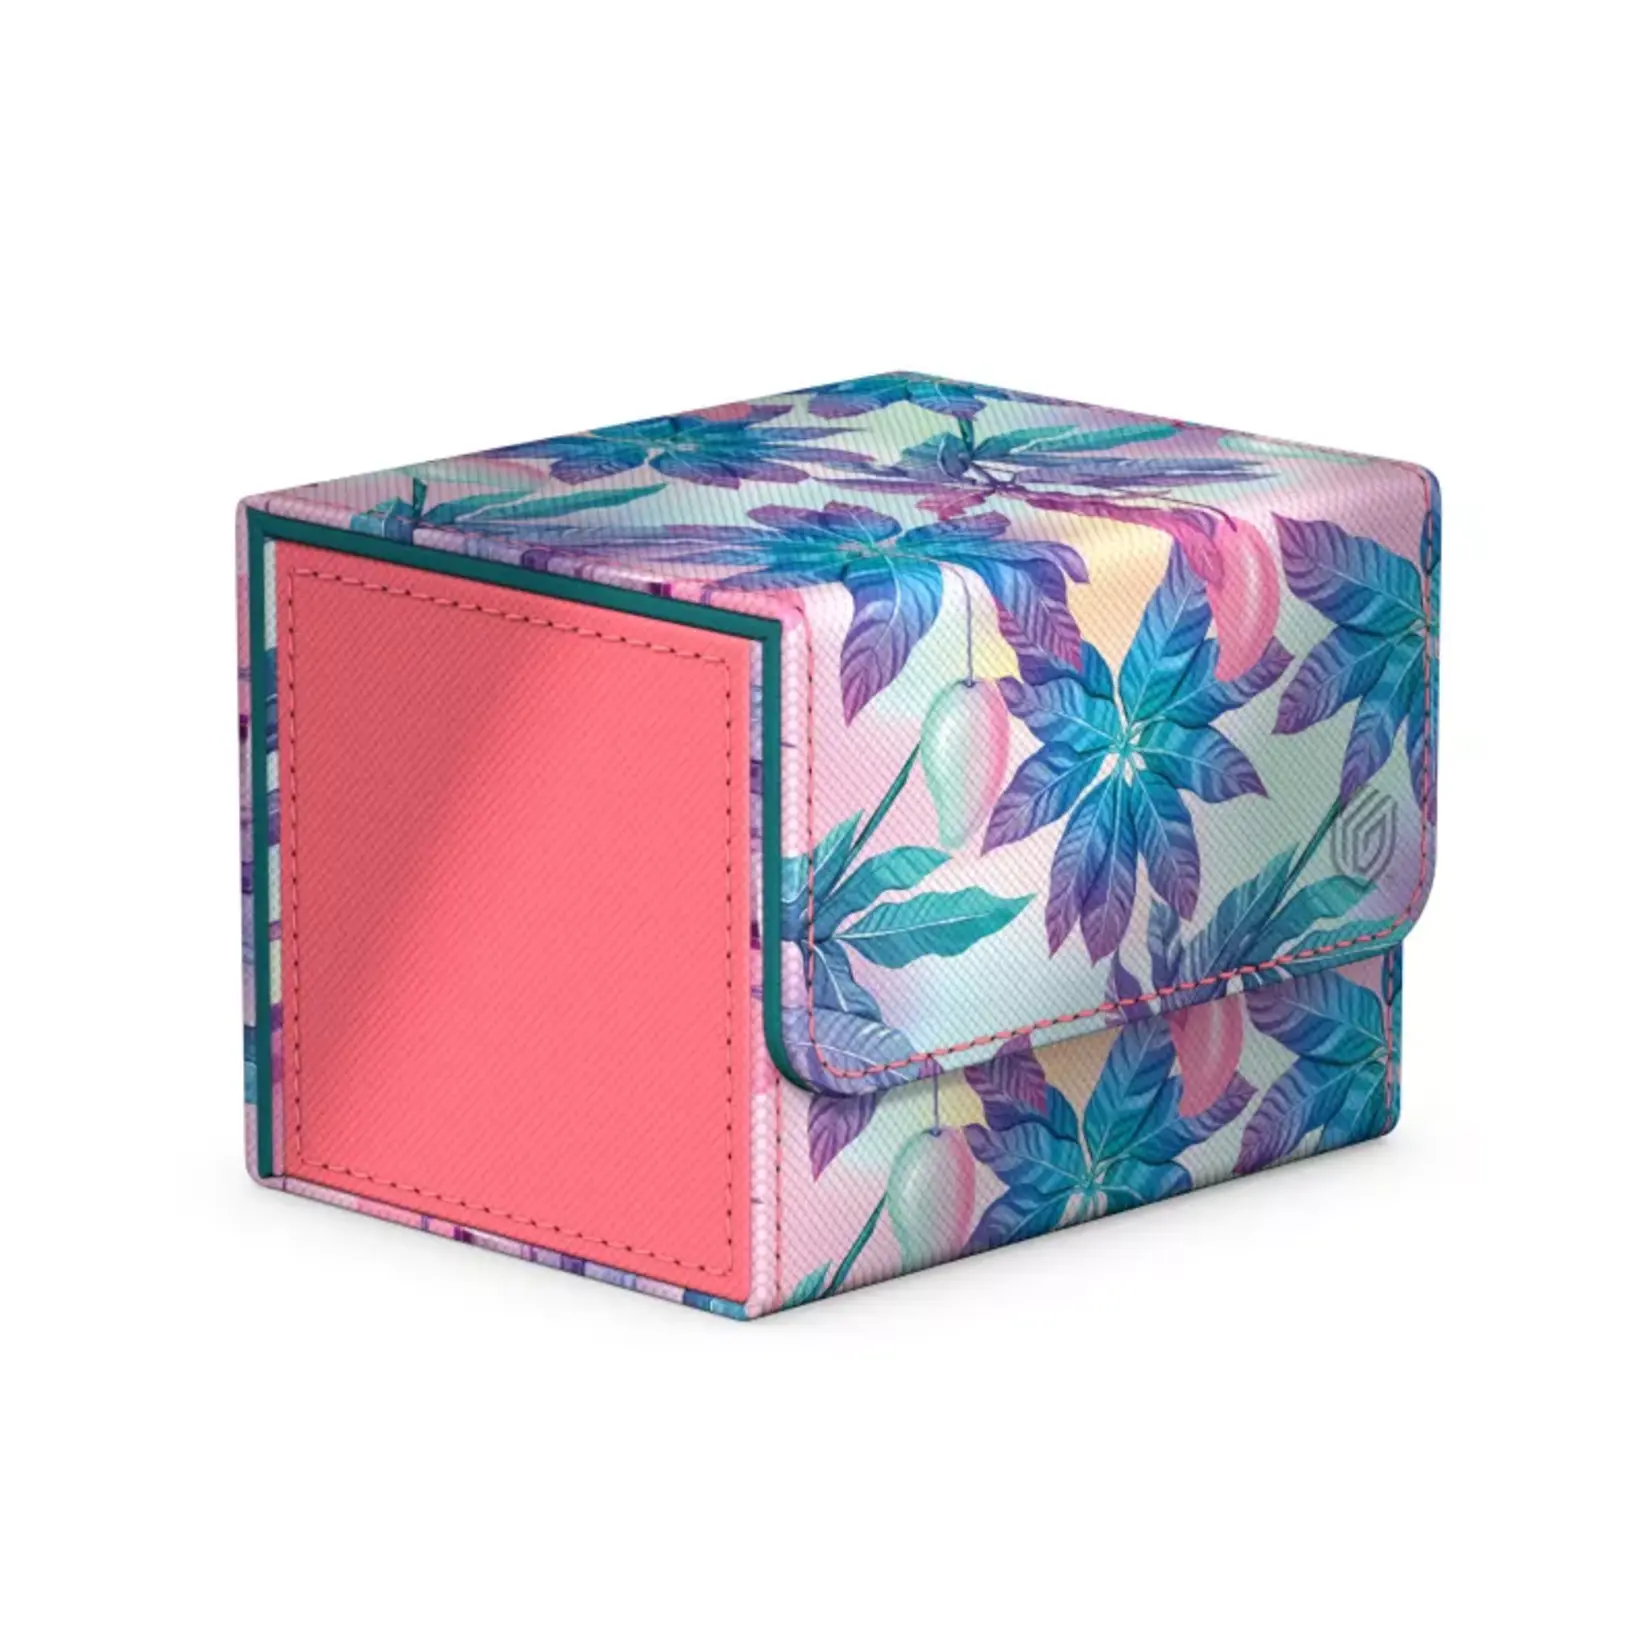 Ultimate Guard Sidewinder 100+ Xenoskin "floral places" - Miami pink